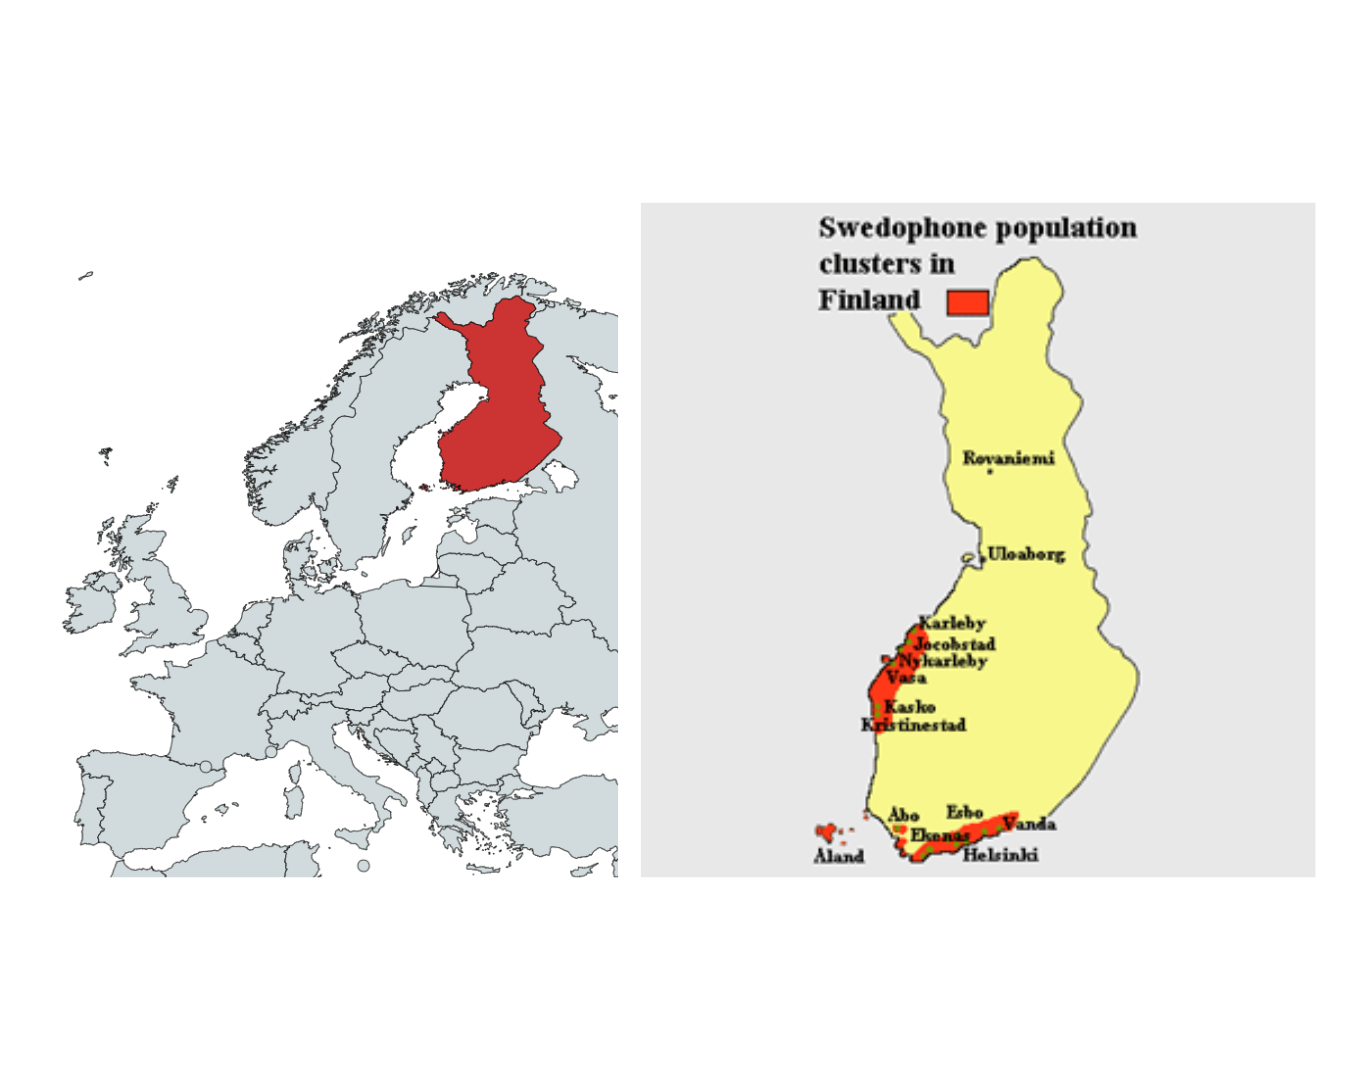 A map of Finland and a map of the Swedophone population clusters in Finland